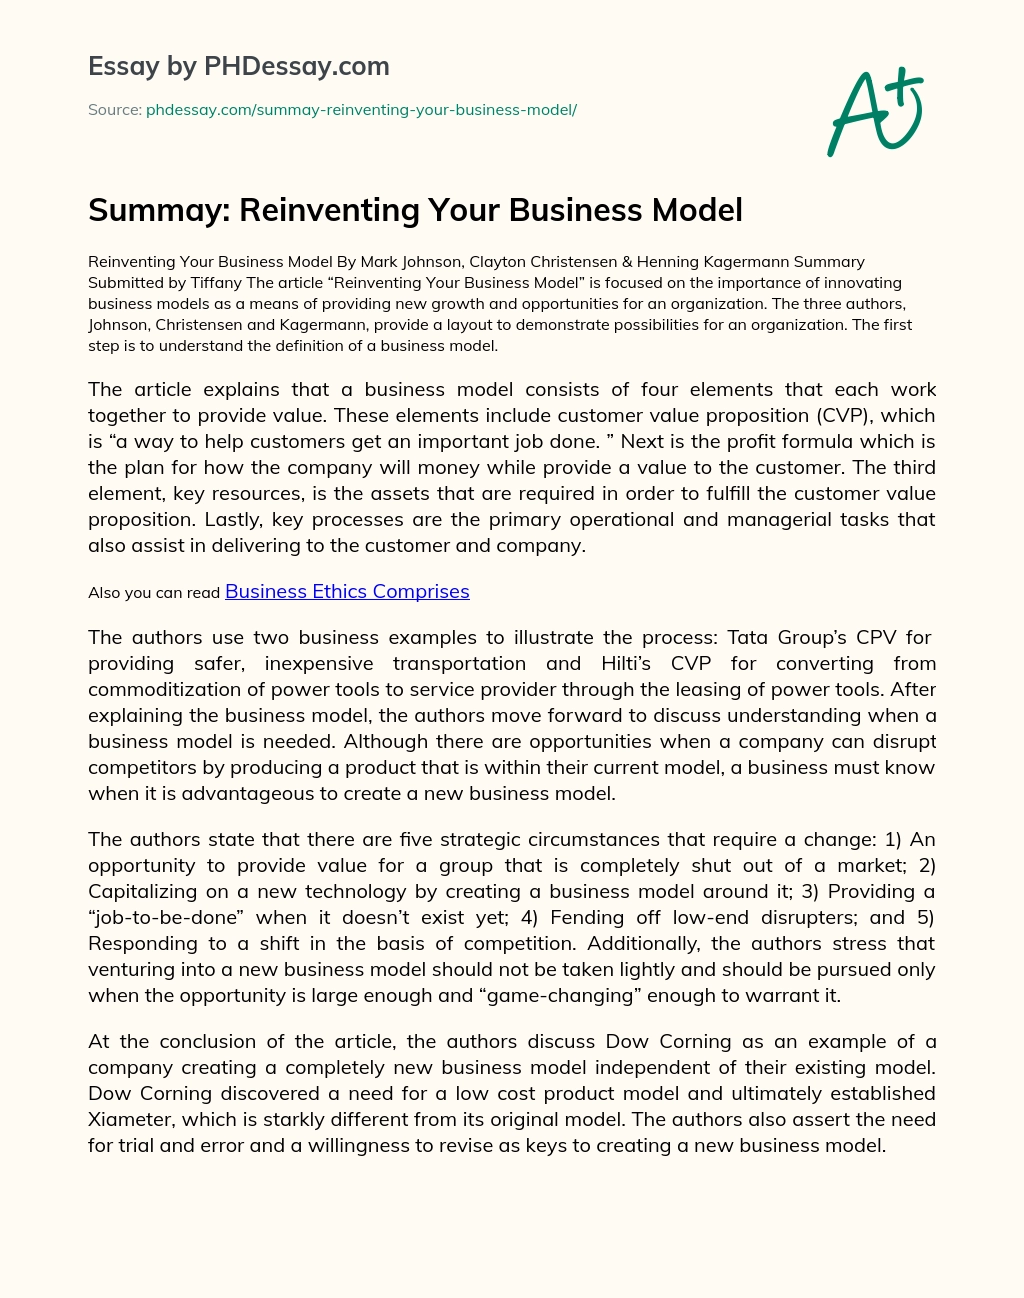 Summay: Reinventing Your Business Model essay